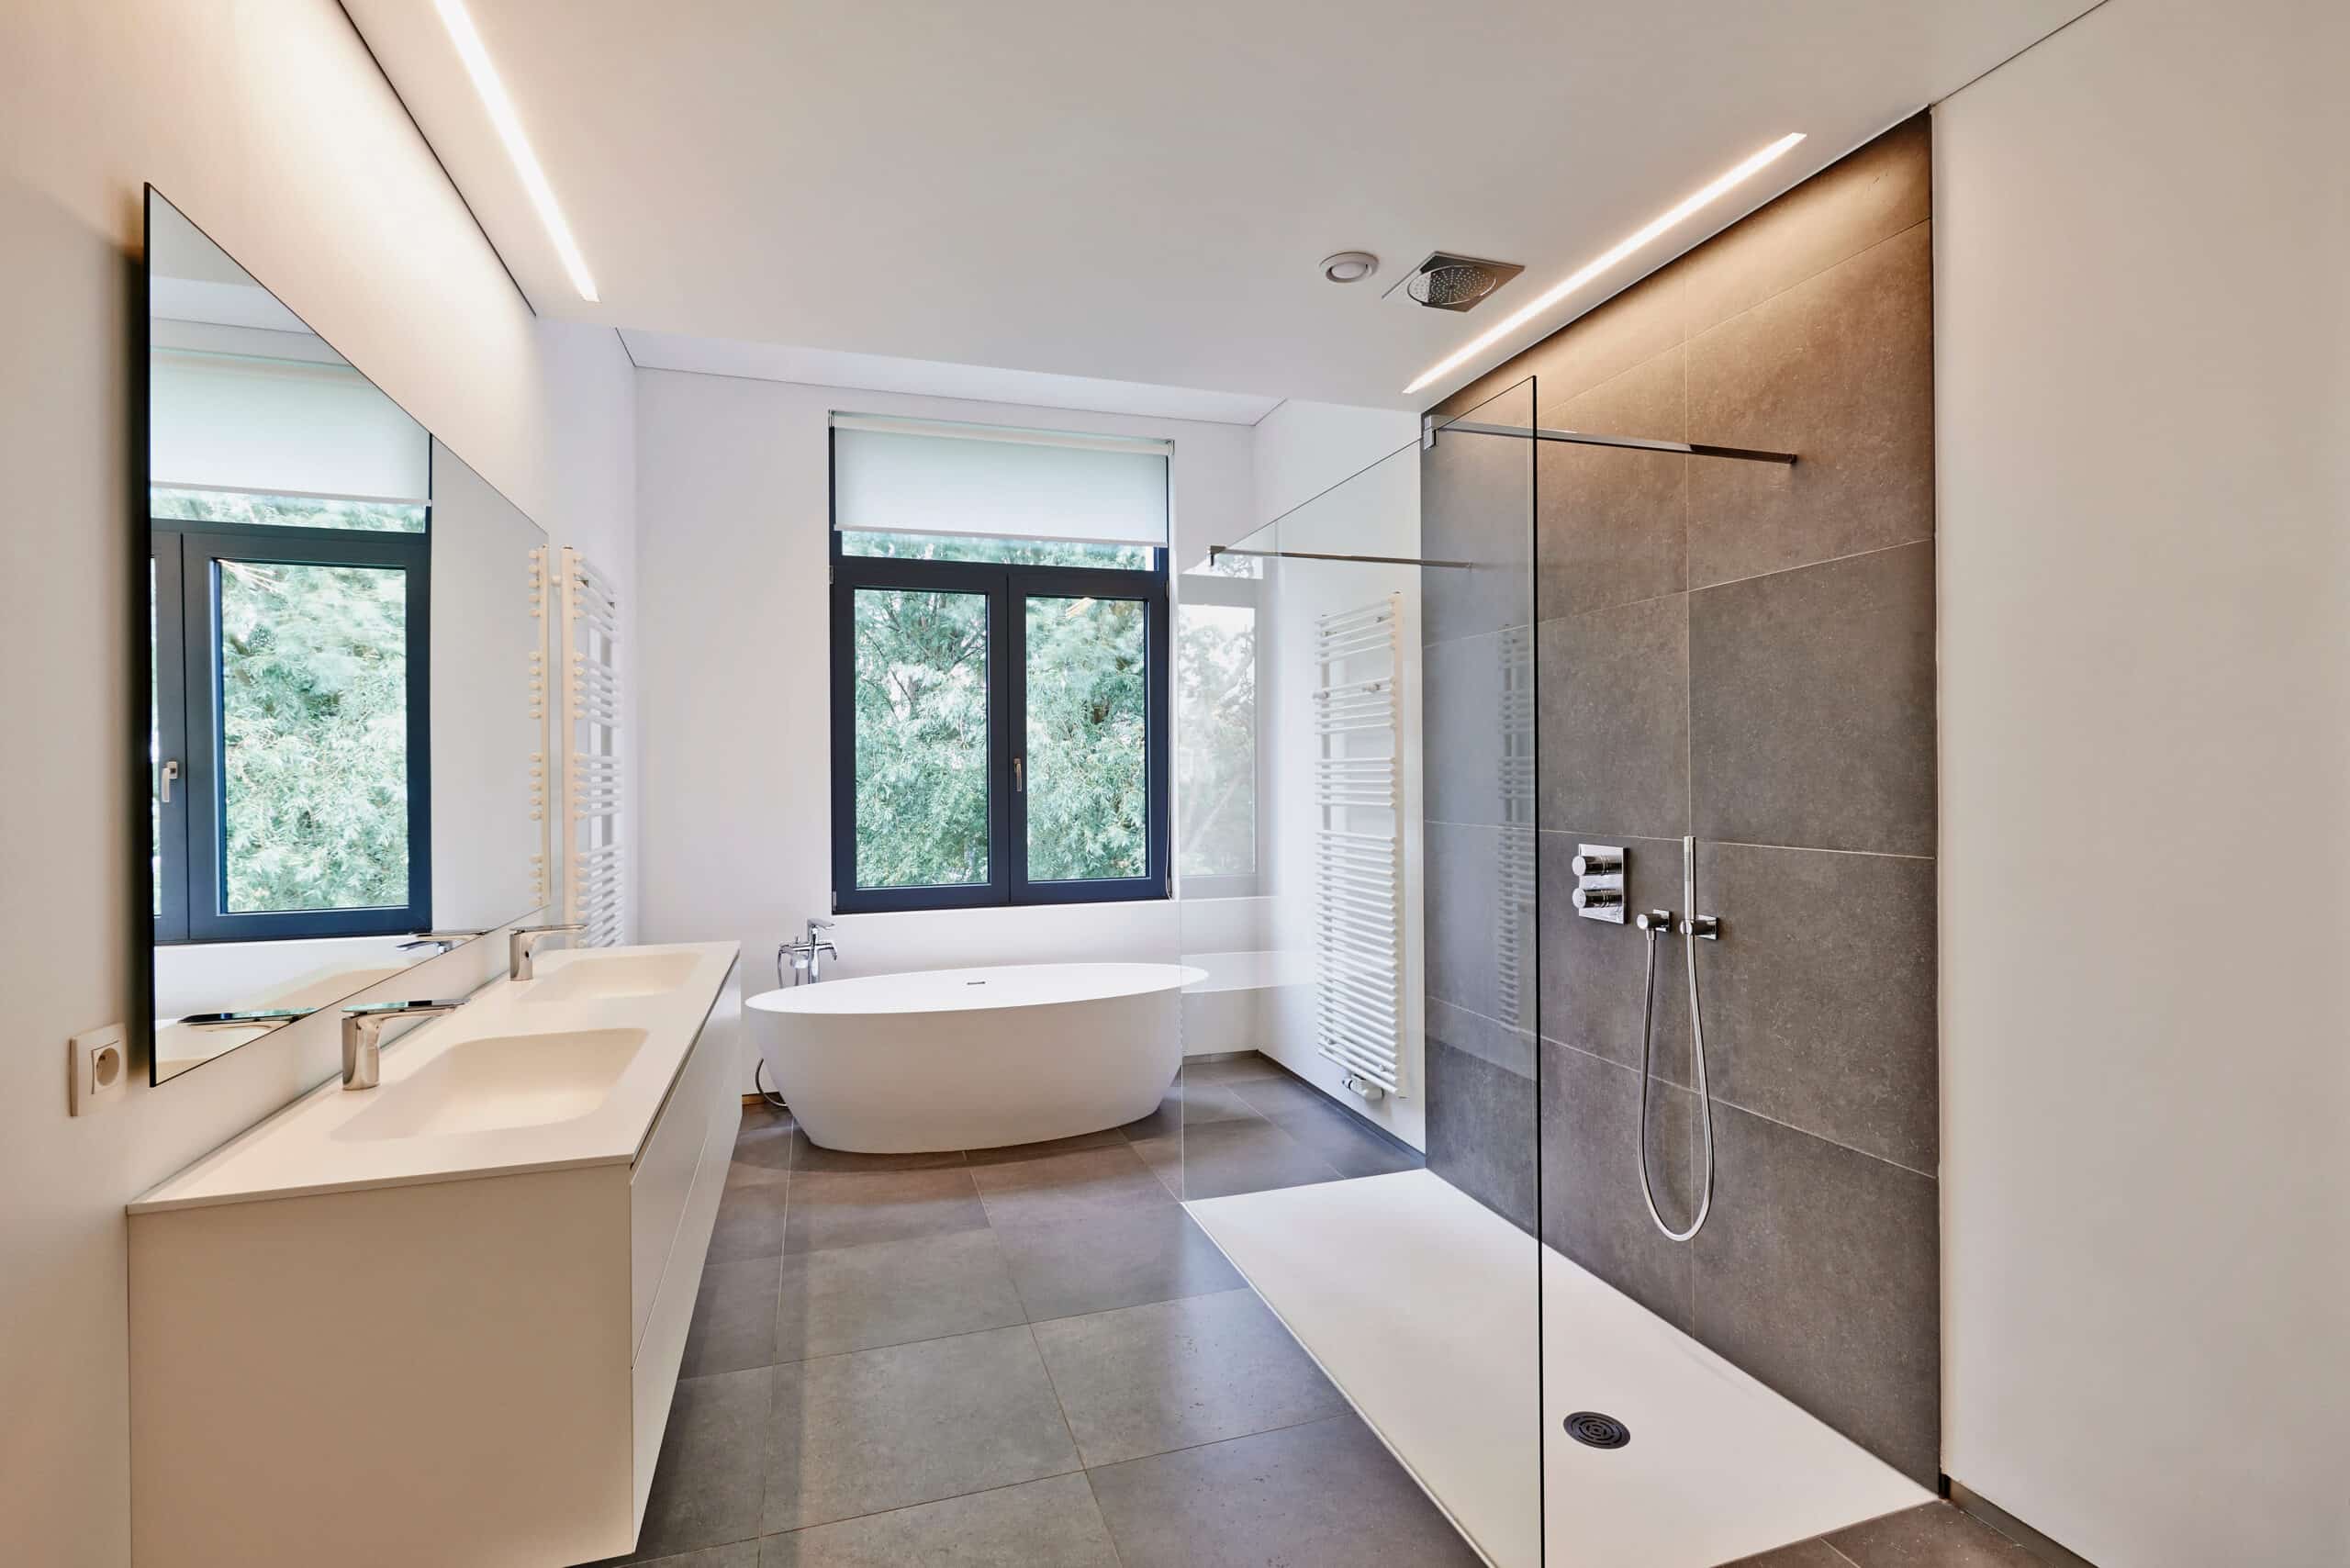 Spacious white bathroom with grey tiles wall and white flooring waterfall shower and bath tub